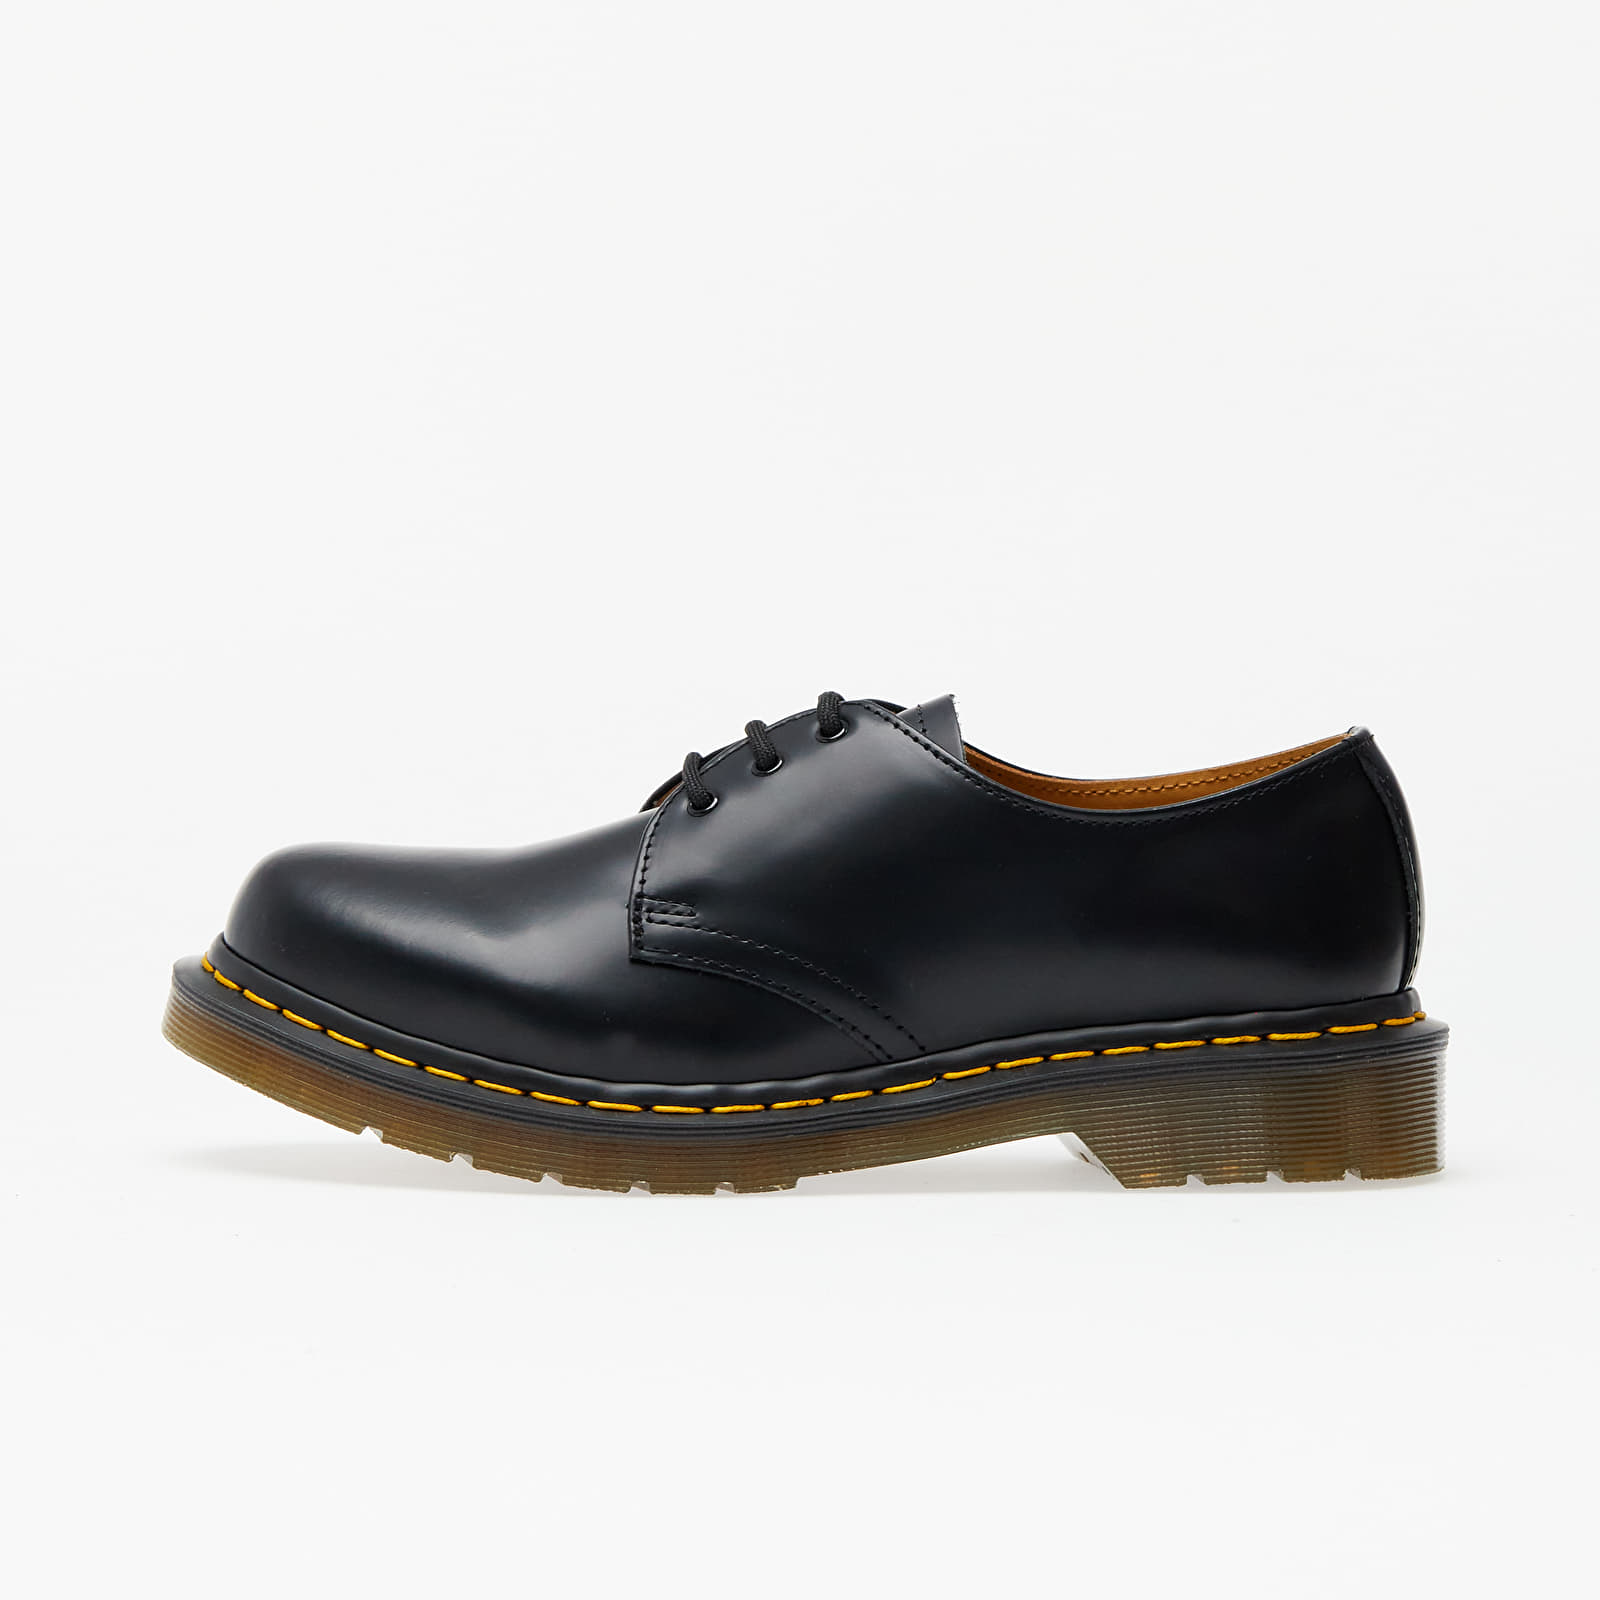 Women's shoes Dr. Martens 1461 W Black Smooth